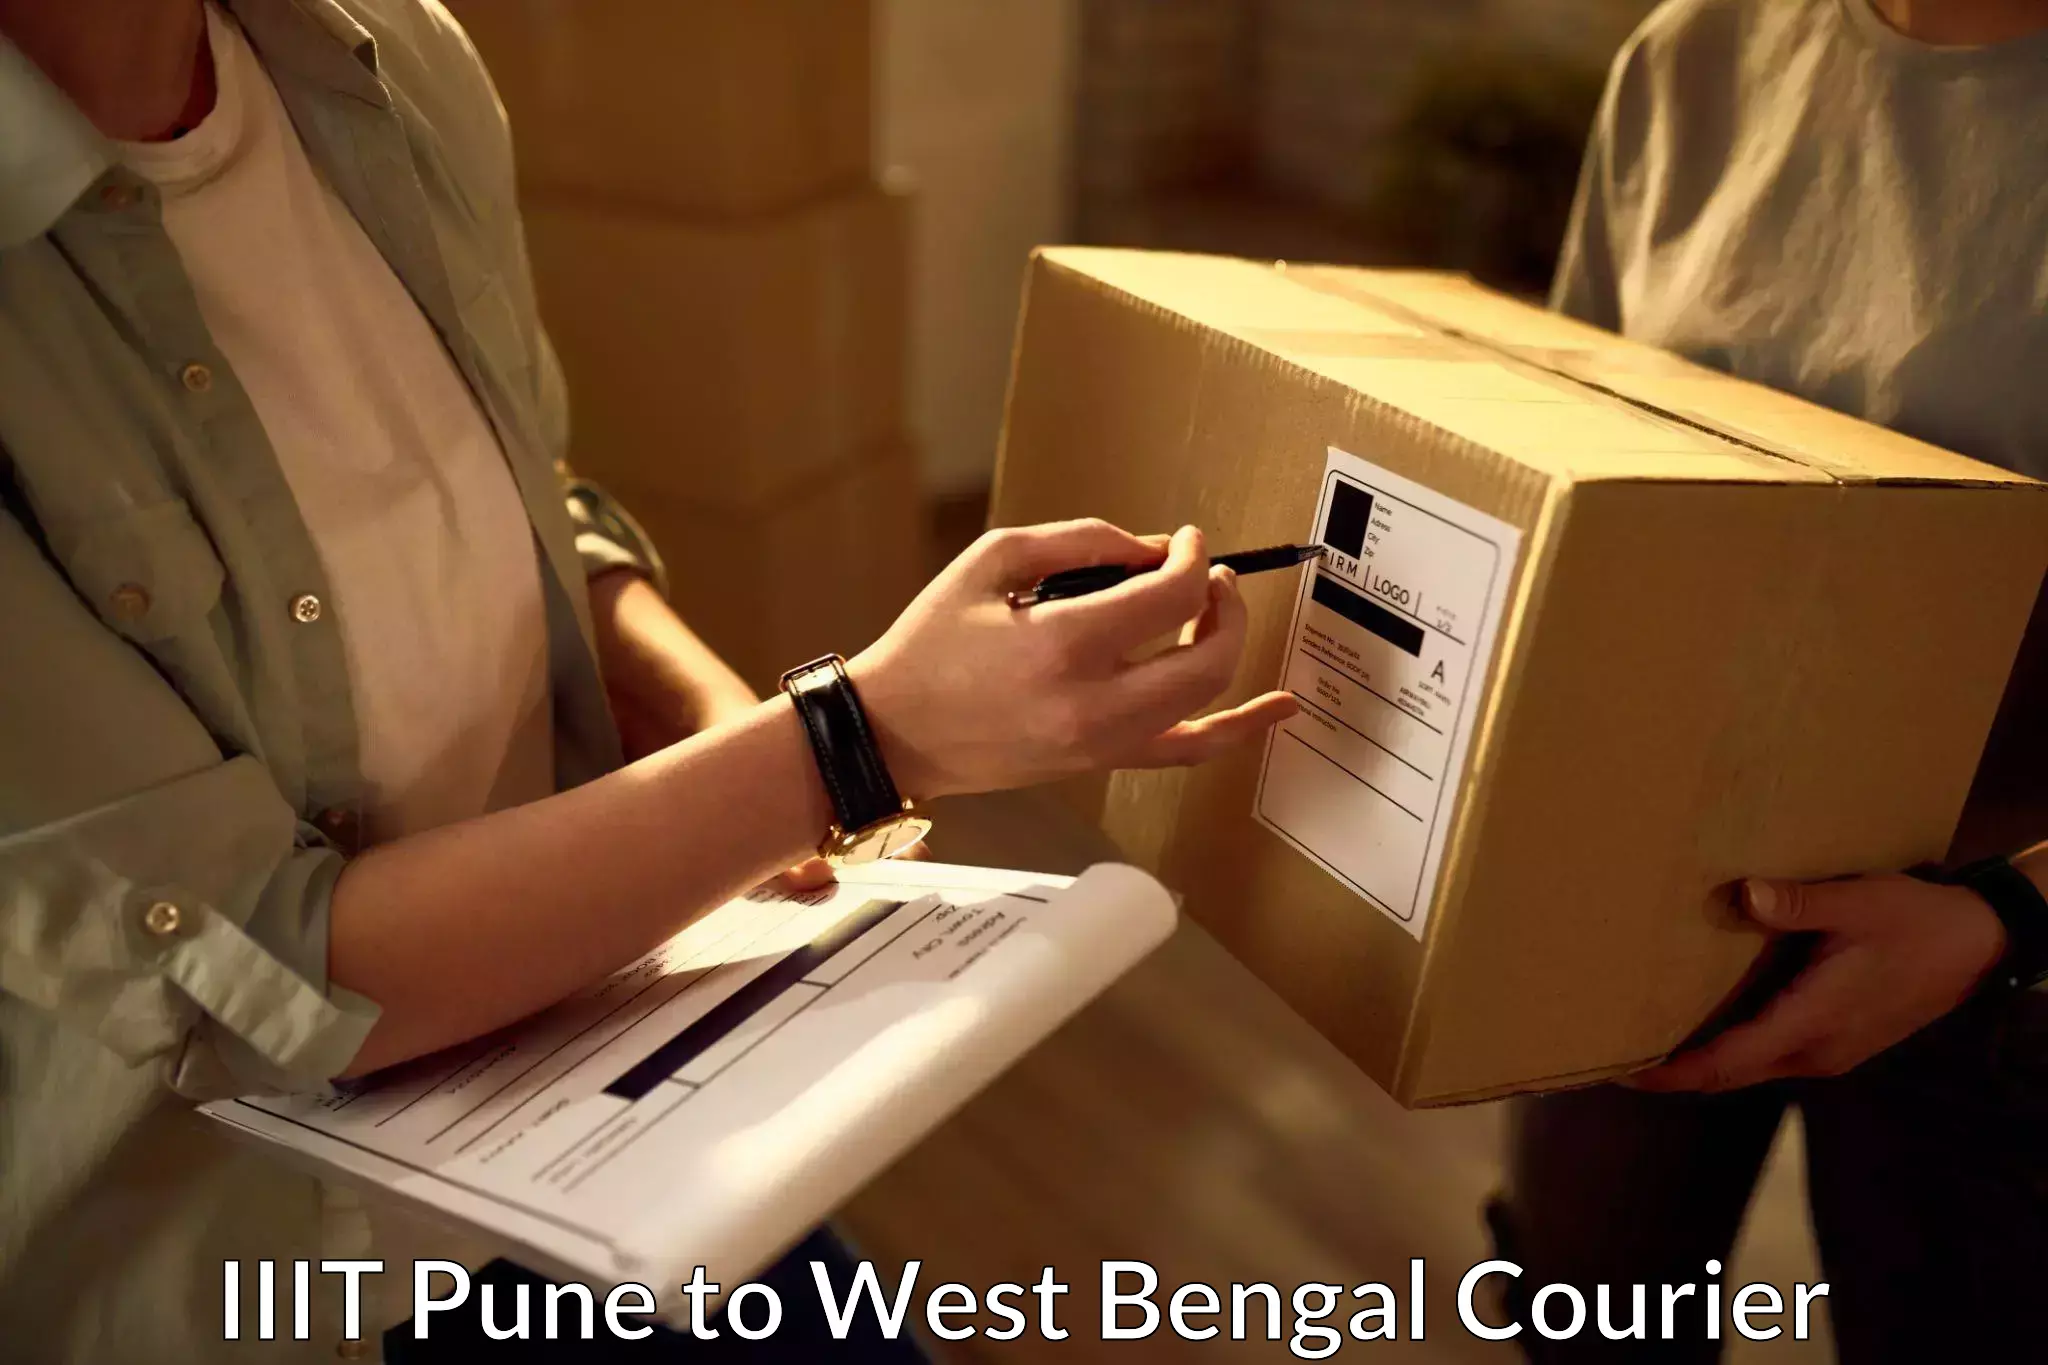 Express delivery capabilities IIIT Pune to Kolkata Port